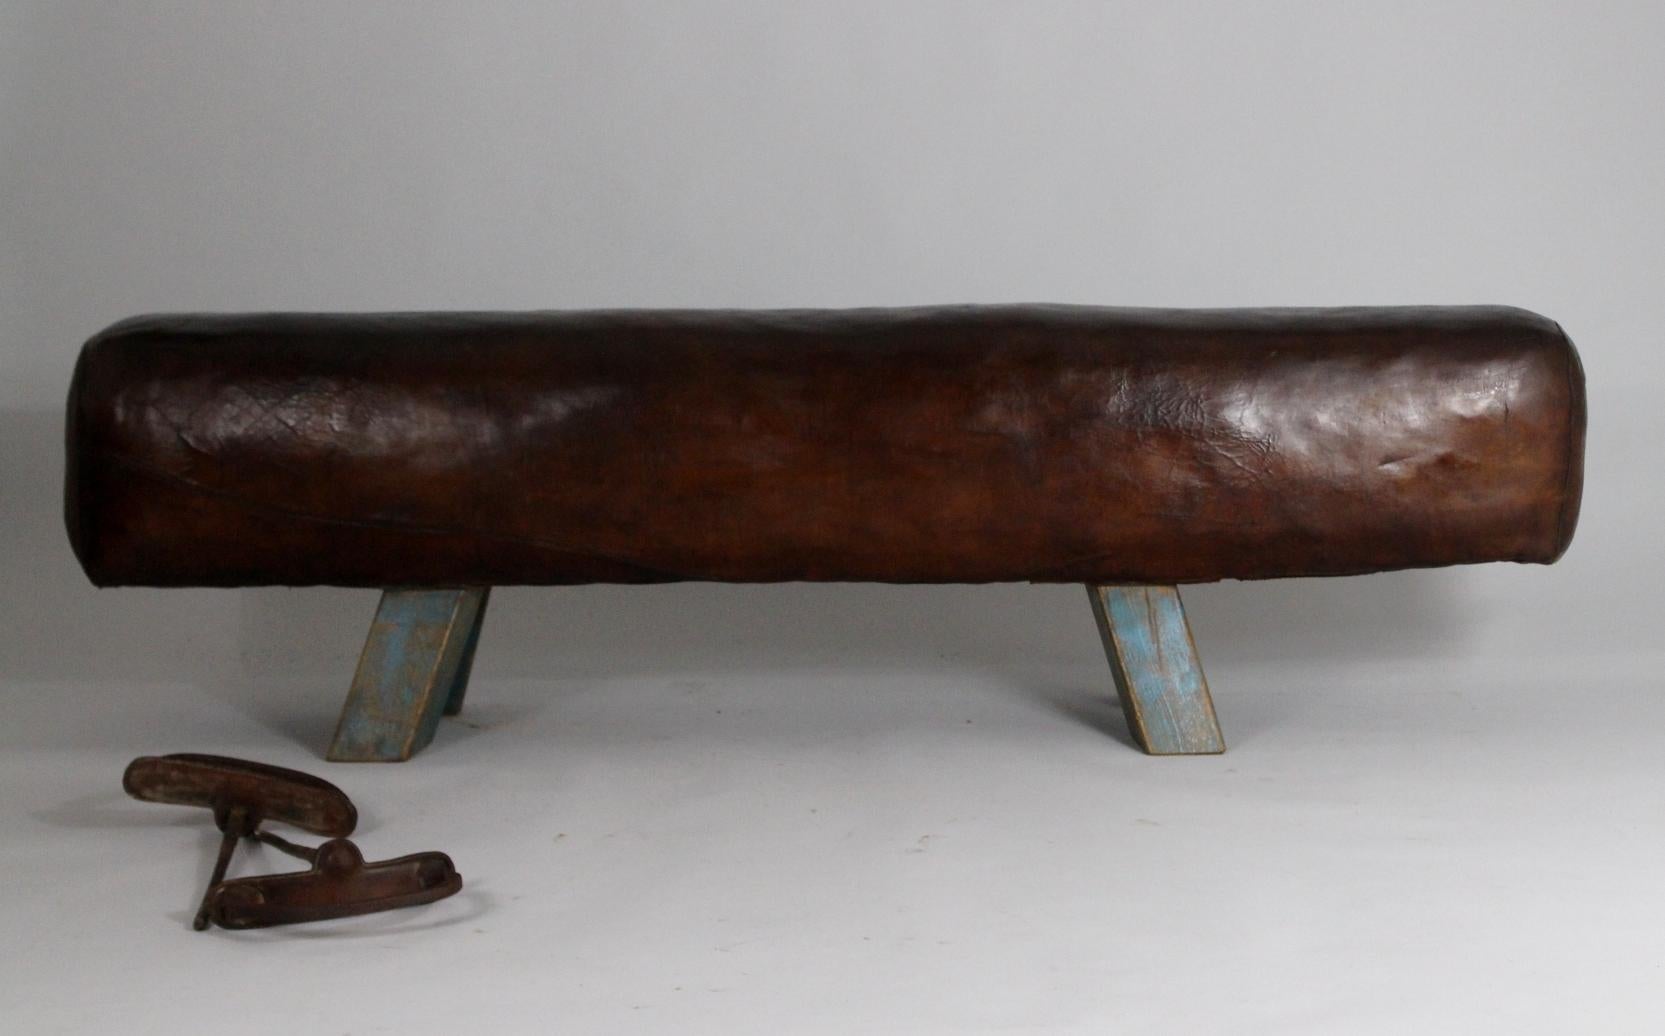 Old leather gym pommel horse with iron handles. Good original condition with patina.